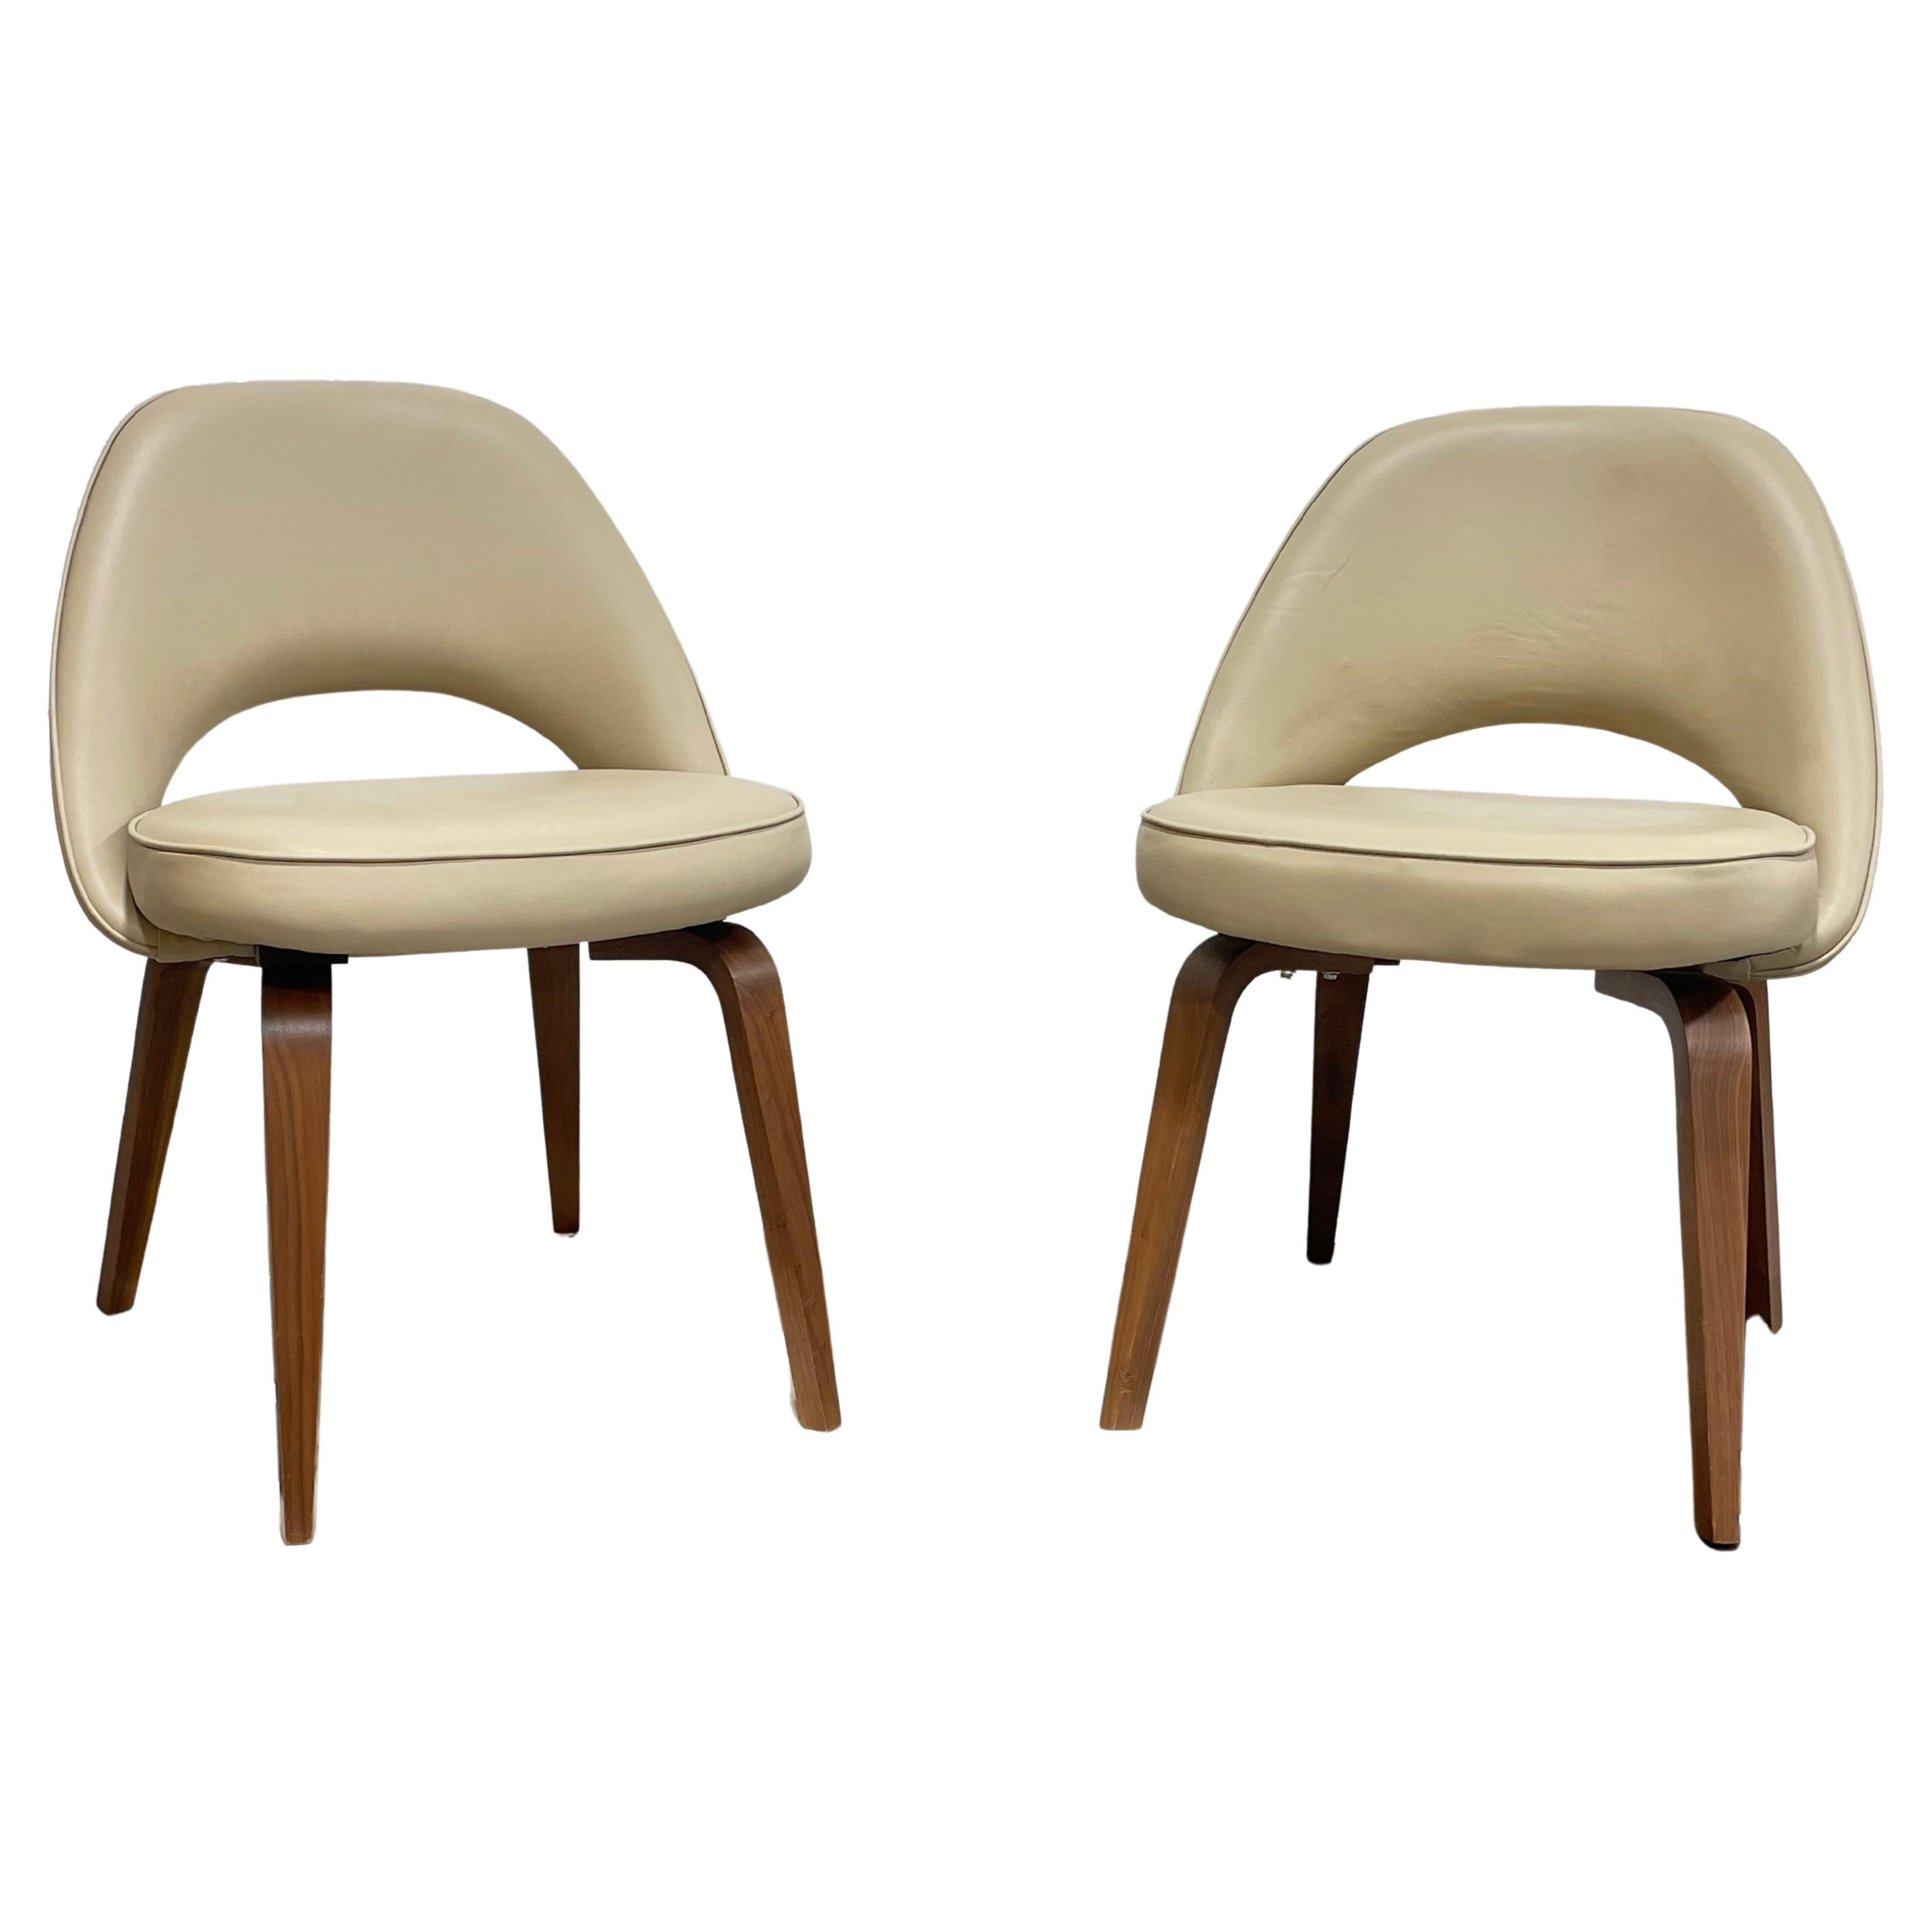 Mid-Century Modern Saarinen Styled Side Chairs, a Pair For Sale